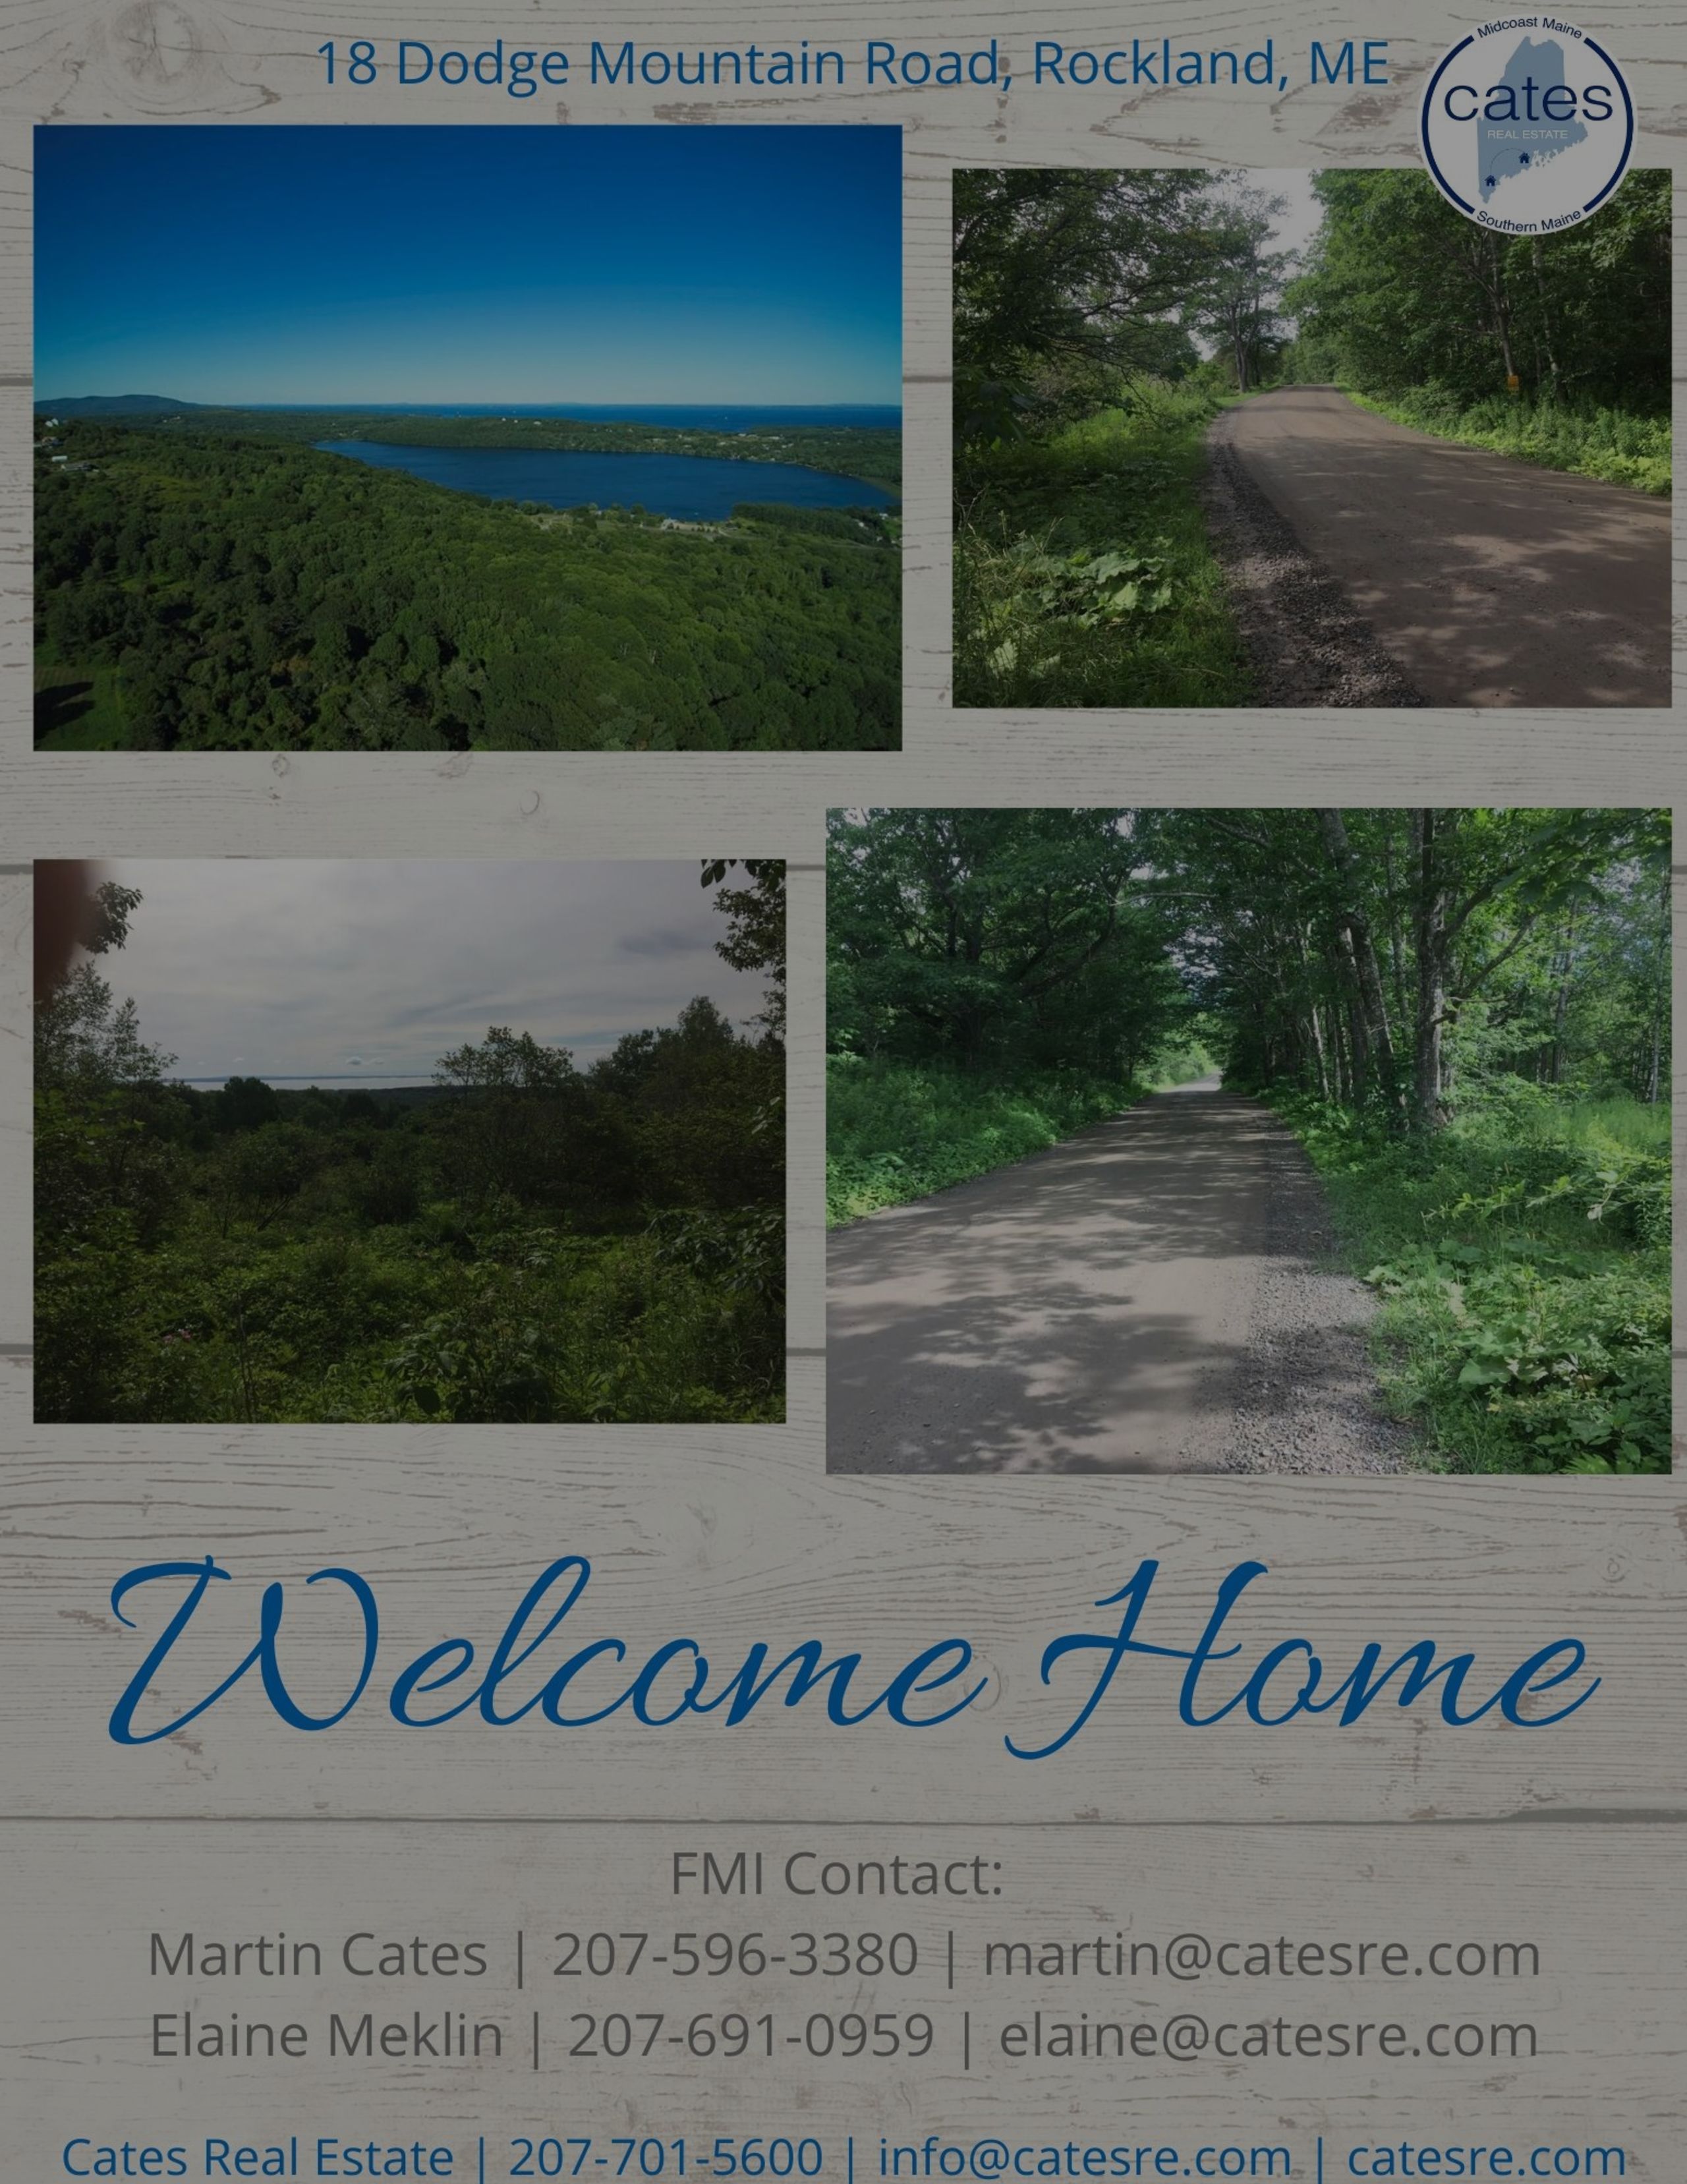 18 Dodge Mountain Road, Rockland ~ Land for Sale!